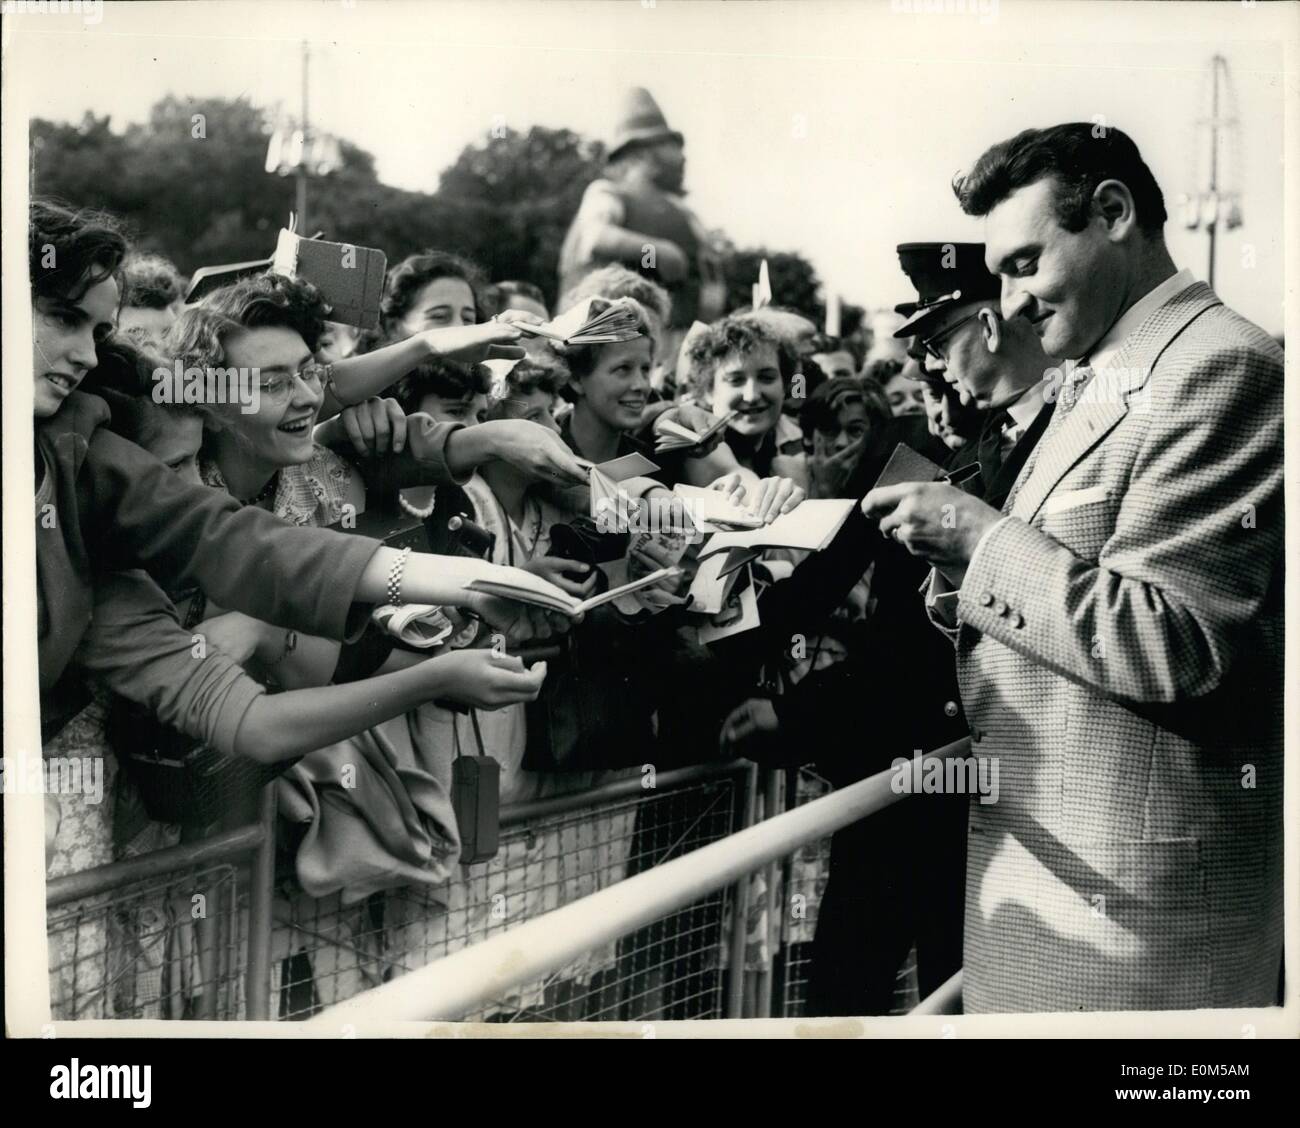 Aug. 08, 1953 - Britain's First Mass Fan Club Party To Welcome Back Frankie Laine: Members of the British Frankie Laine Fan Club, which has a membership of 25,000, gave a ''welcome back'' part to the famous American singer, at the Festival Gardens, on the South Bank, this evening. Special police were called in to control the crowds. Photo shows Some of the fans push their way to the front to get Frankie Laine's autograph. Stock Photo